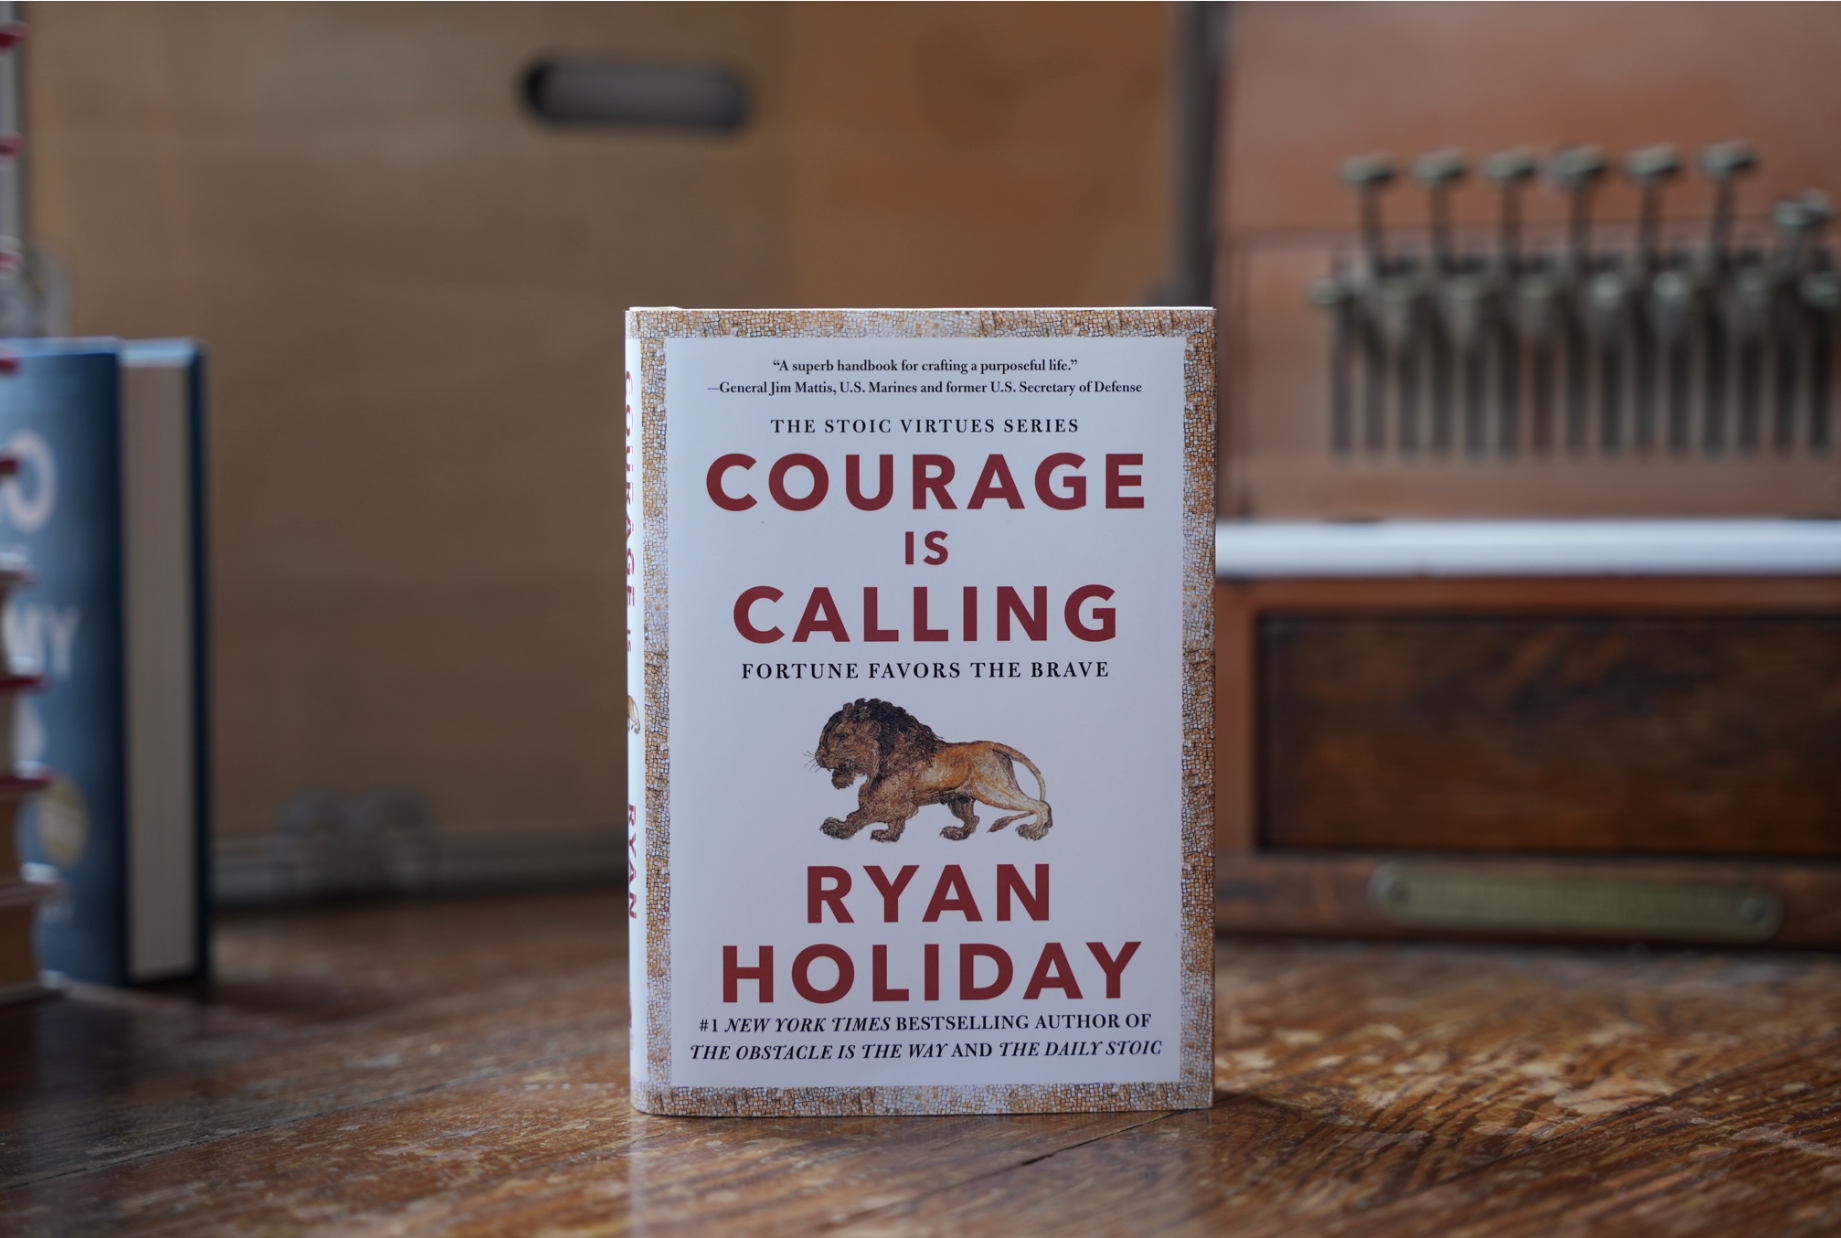 Ryan Holiday, Best-Selling Author